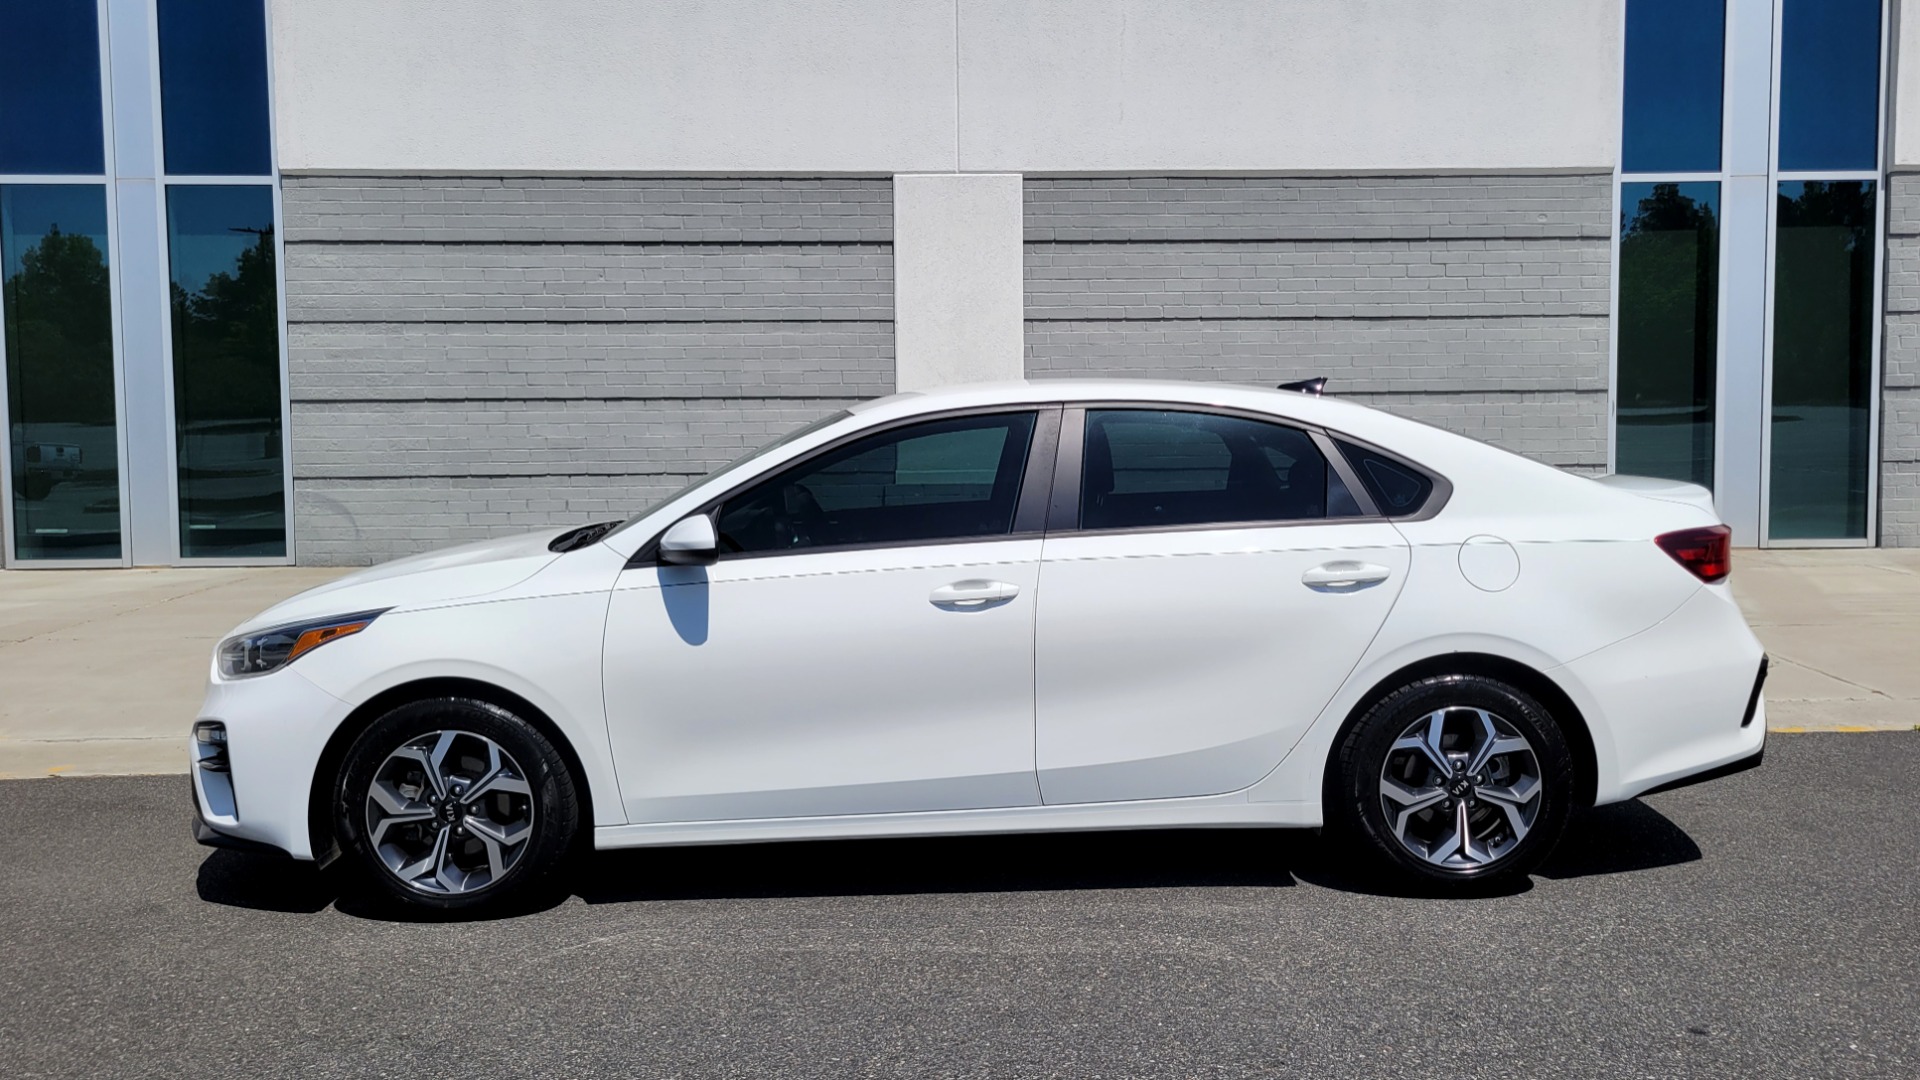 Used 2019 Kia FORTE LXS IVT 2.0L SEDAN / CVT TRANS / APPLE / DUAL-ZONE AIR / REARVIEW for sale $16,995 at Formula Imports in Charlotte NC 28227 4